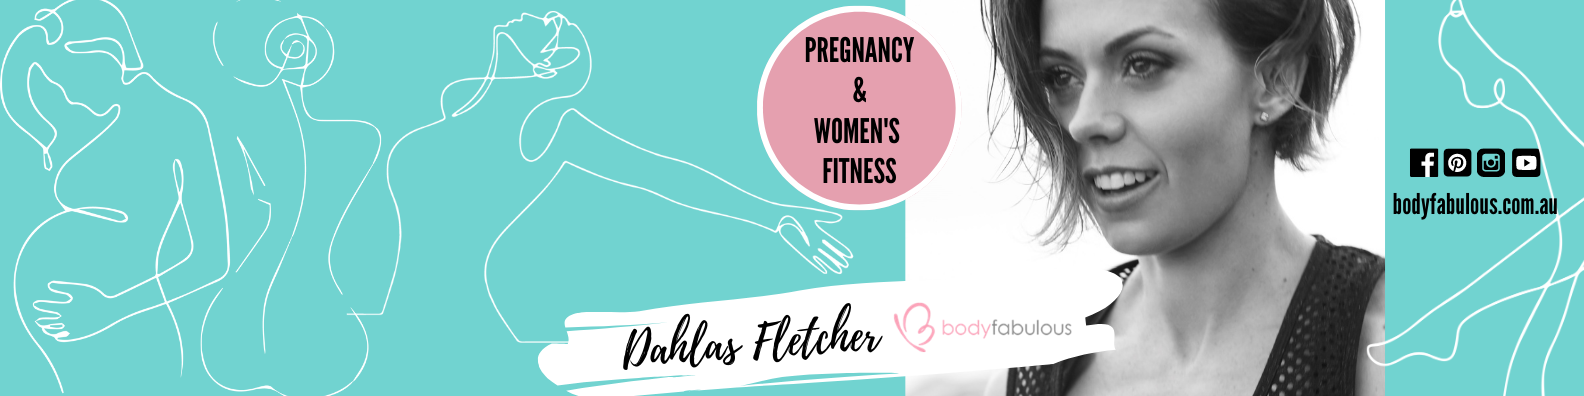 Dahlas_pregnancy-womens-fitness-personal-group-fitness-coach-trainer